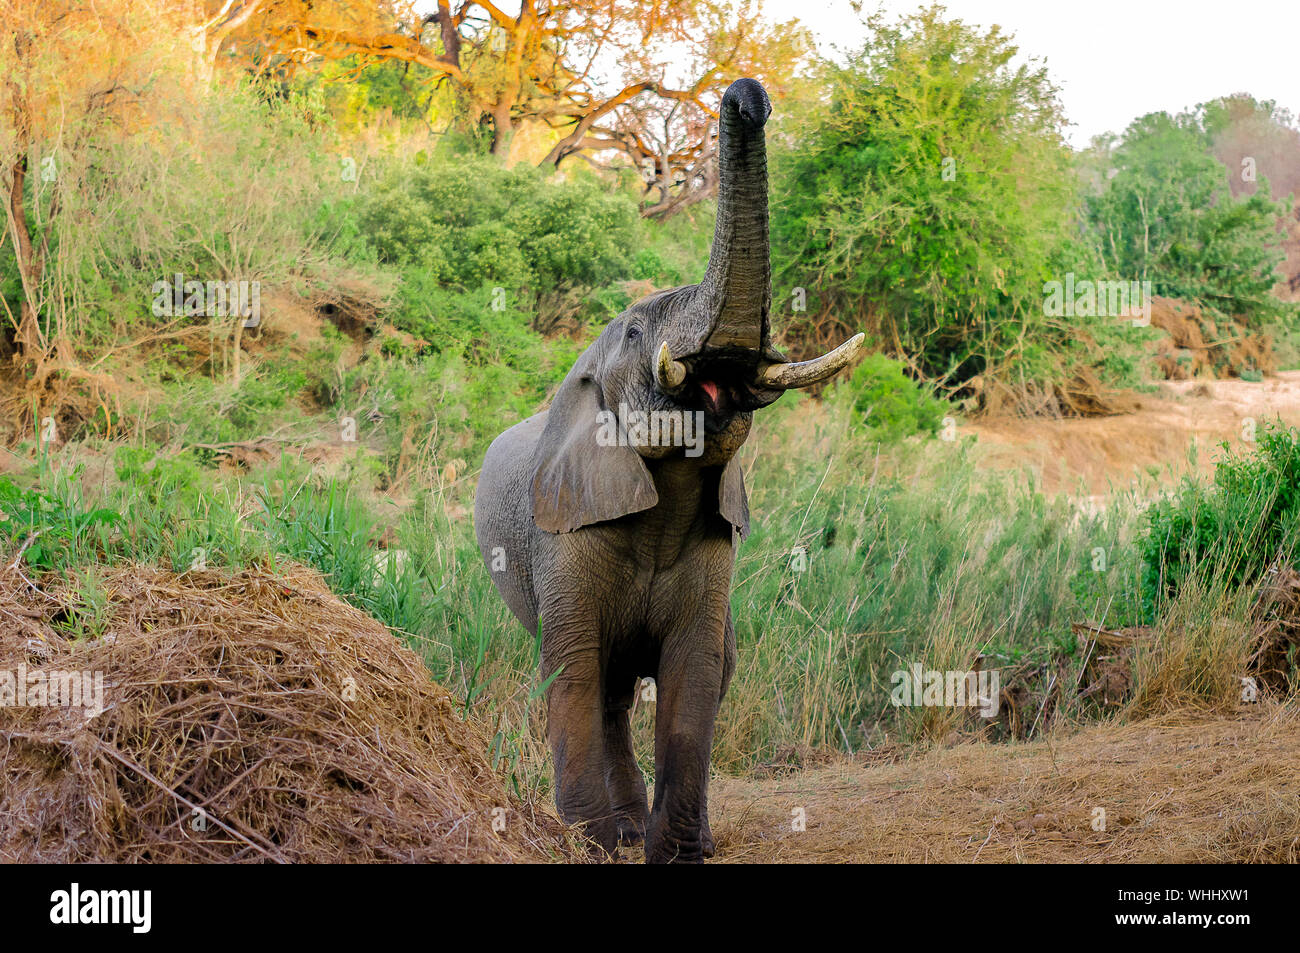 Young Elephant Walking On Field Stock Photo